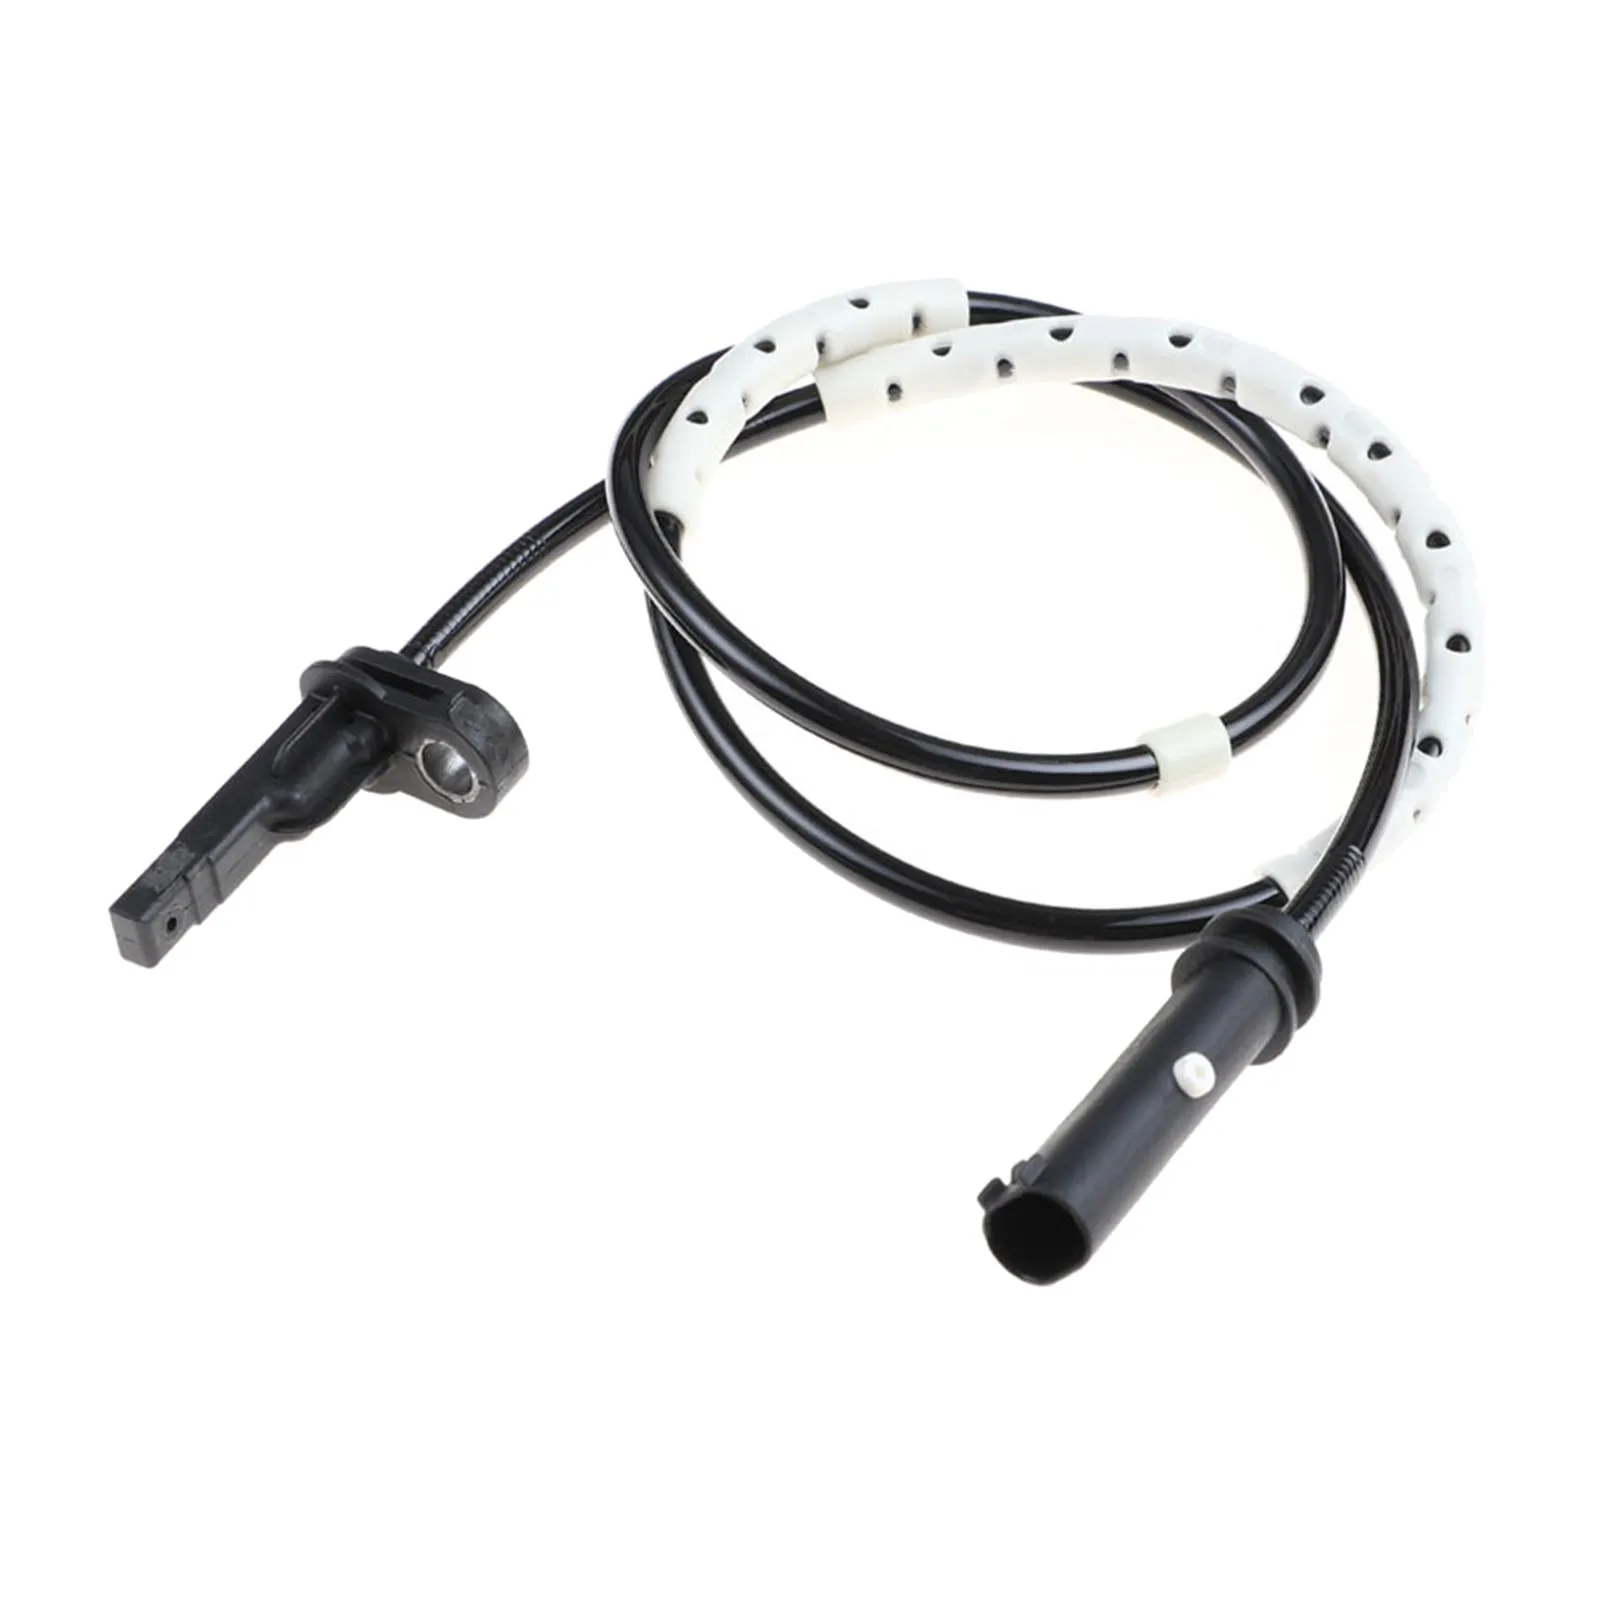 Automobile ABS Wheel Speed Sensor 34526869322 Replaces Left Right 34526791226 Anti-Lock Sensor Fits for BMW F31 F22 F33 F21